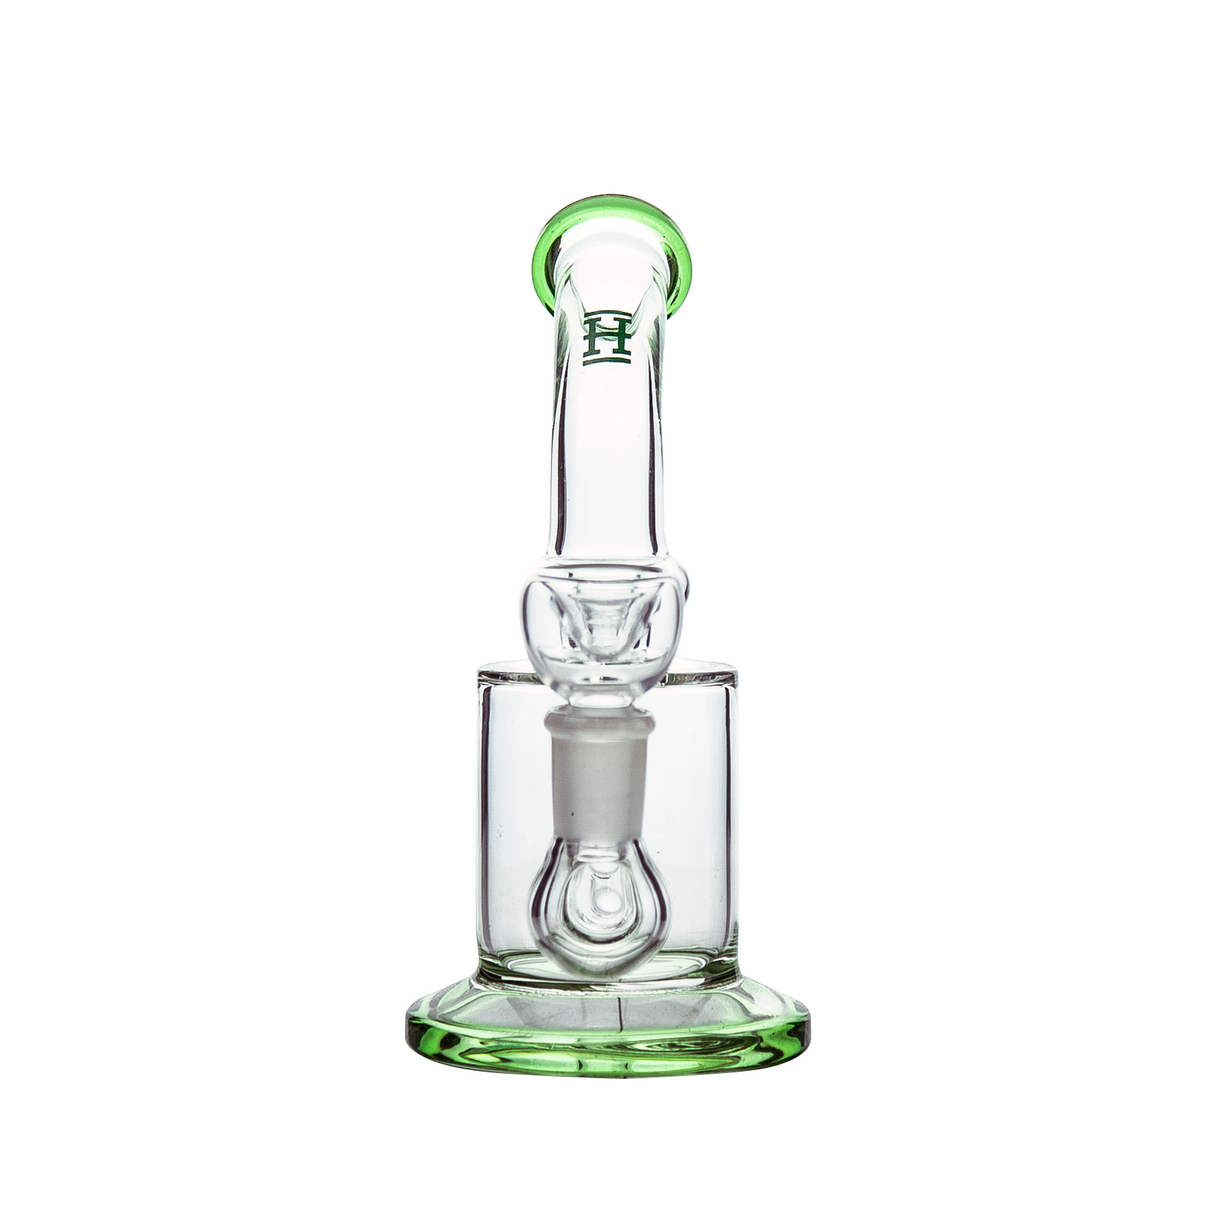 Hemper x CustomGrow420 Inline Perc Rig with bubble design, 6" height, and 14mm joint